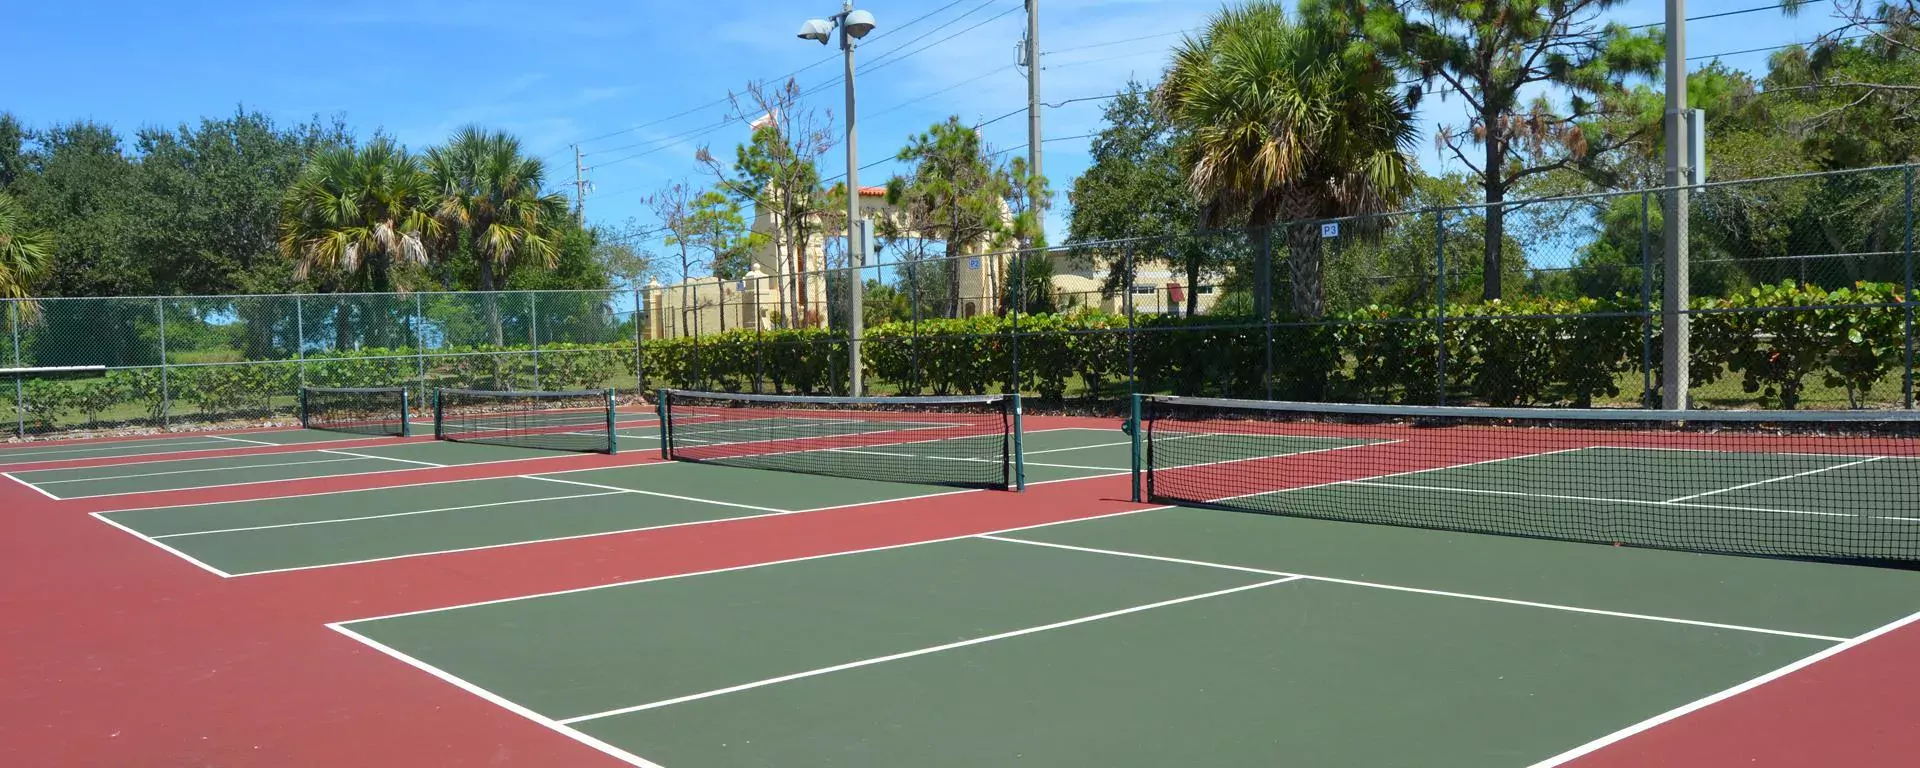 Tennis and pickleball courts at Langford Park